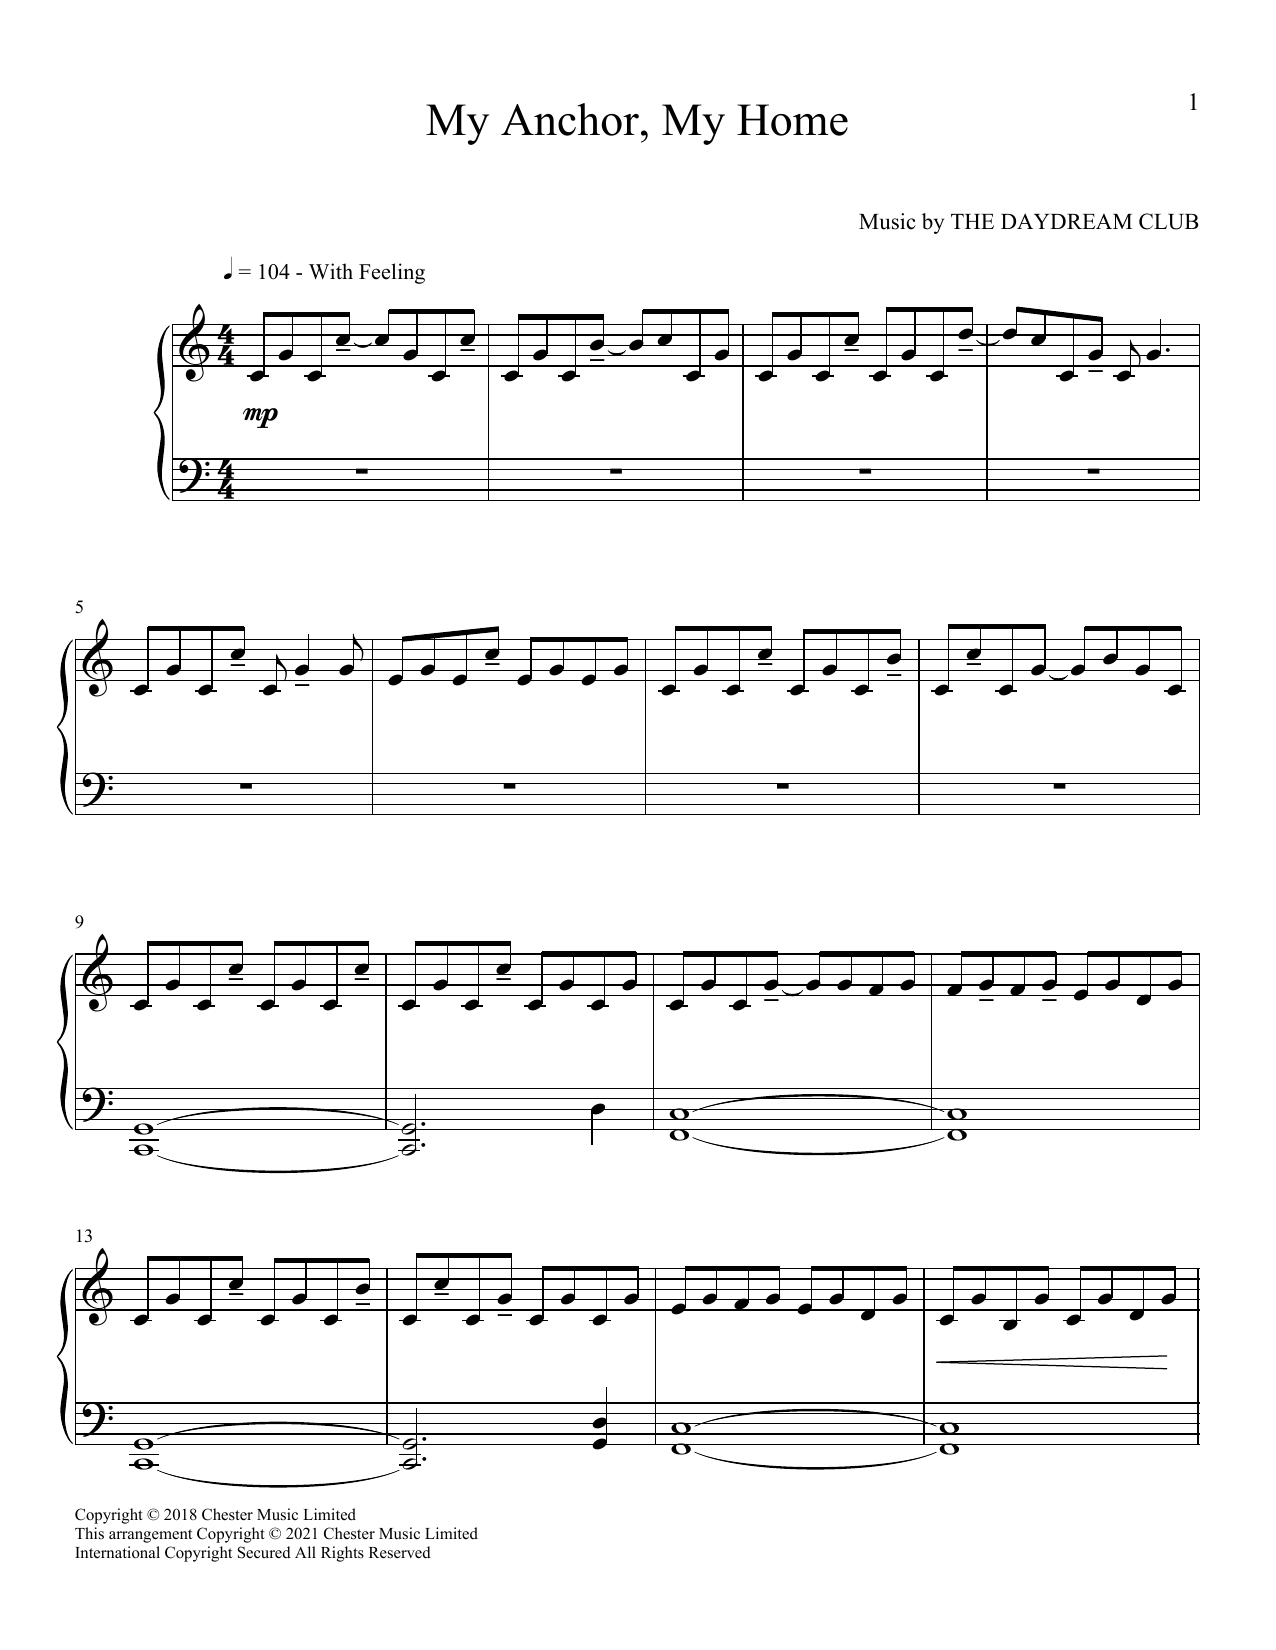 Download The Daydream Club My Anchor, My Home Sheet Music